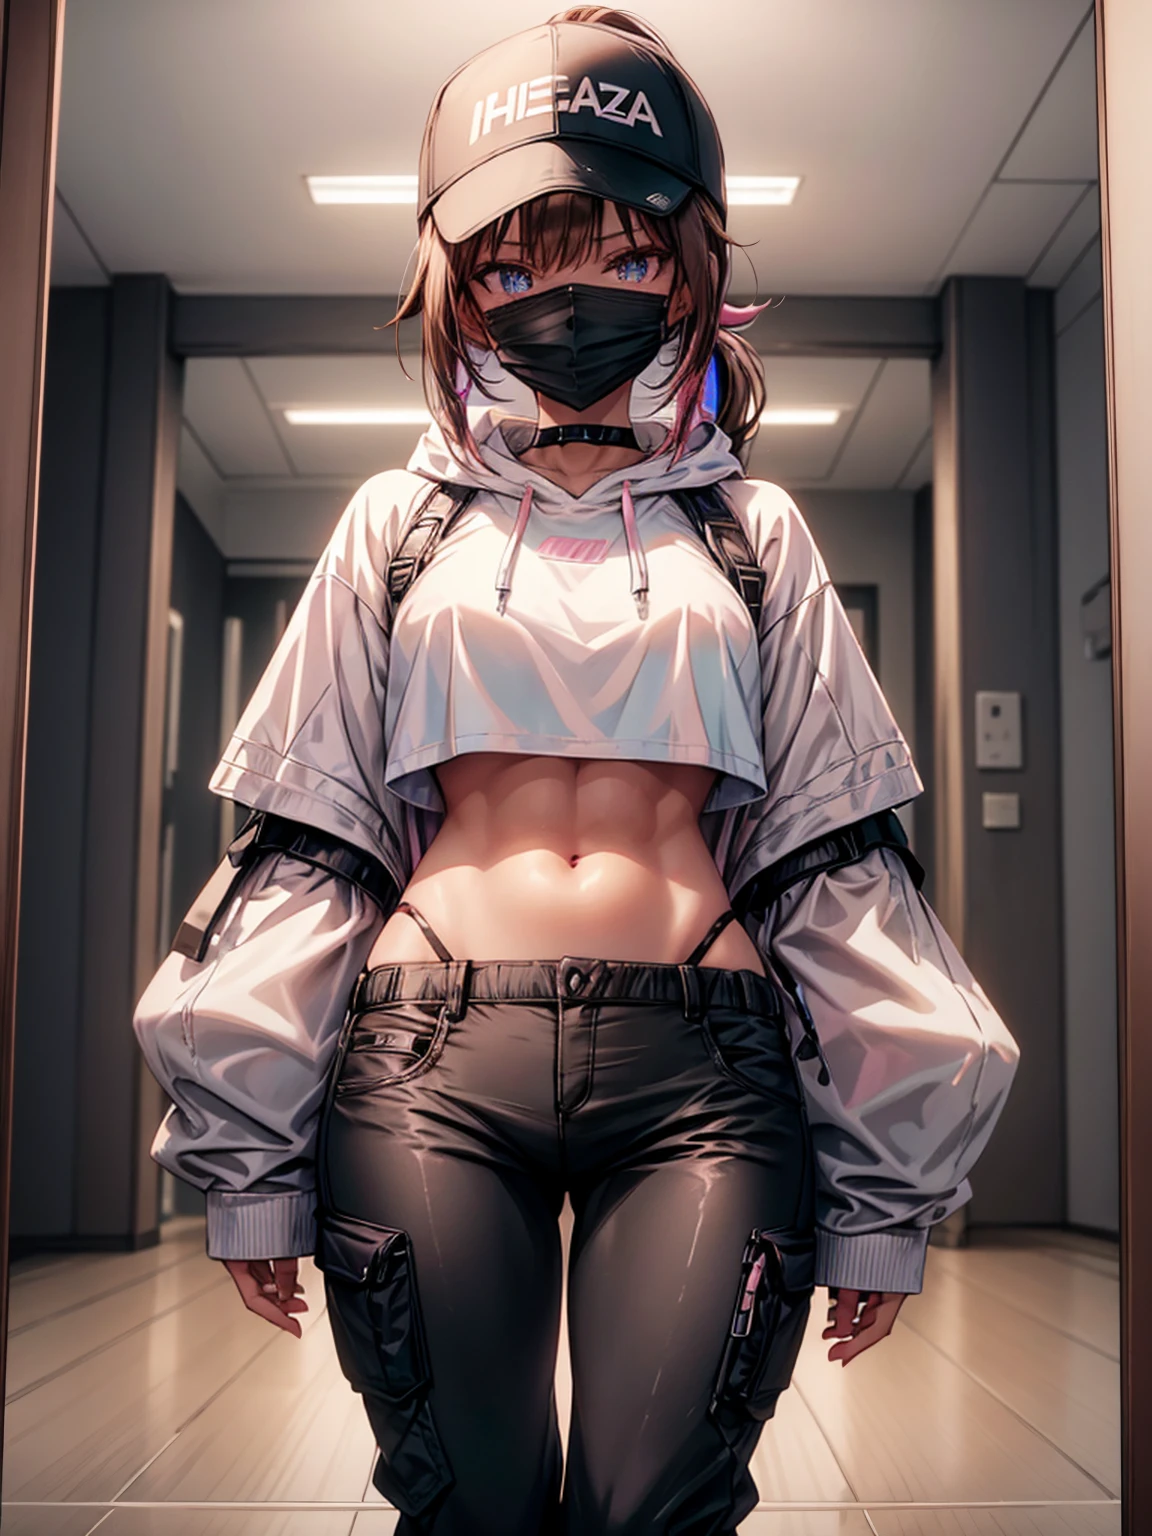 White crop hoodie, black tech wear pants, brown hair, pink highlights, blue eyes, Dutch angle, attractive woman, beautiful woman, anime girl, solo girl, one woman, cute, playful, pink room, simple mirror, toned abs, black face mask, baseball cap, ponytail